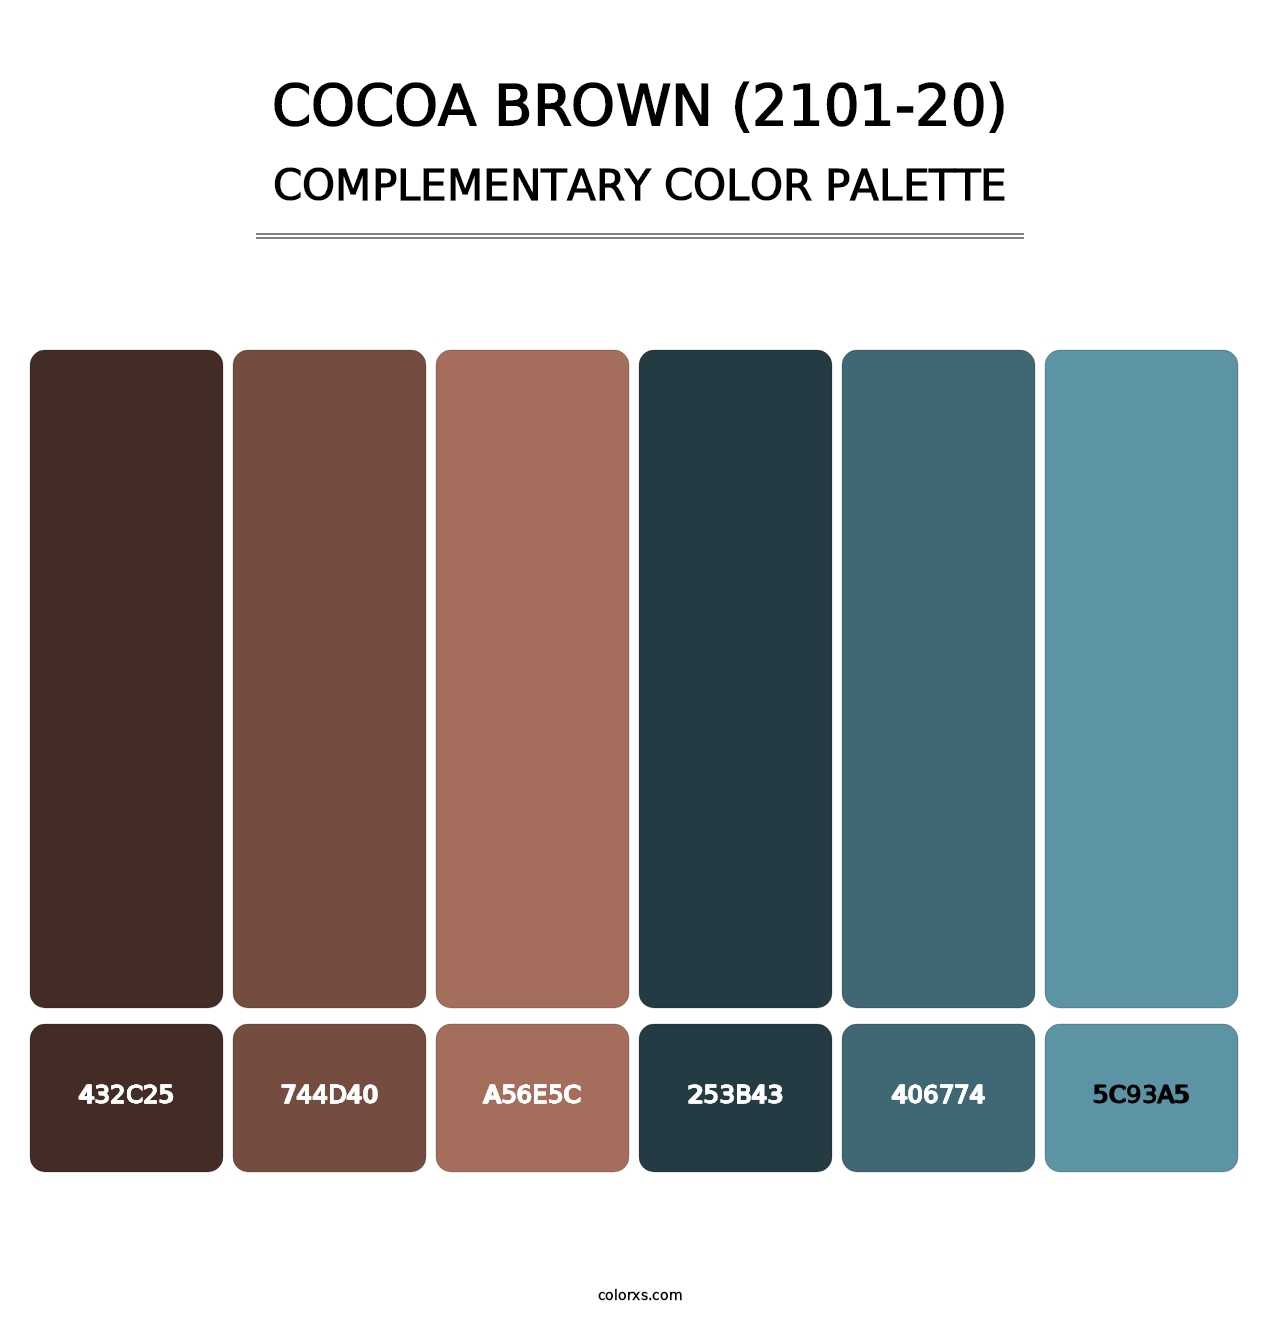 Cocoa Brown (2101-20) - Complementary Color Palette